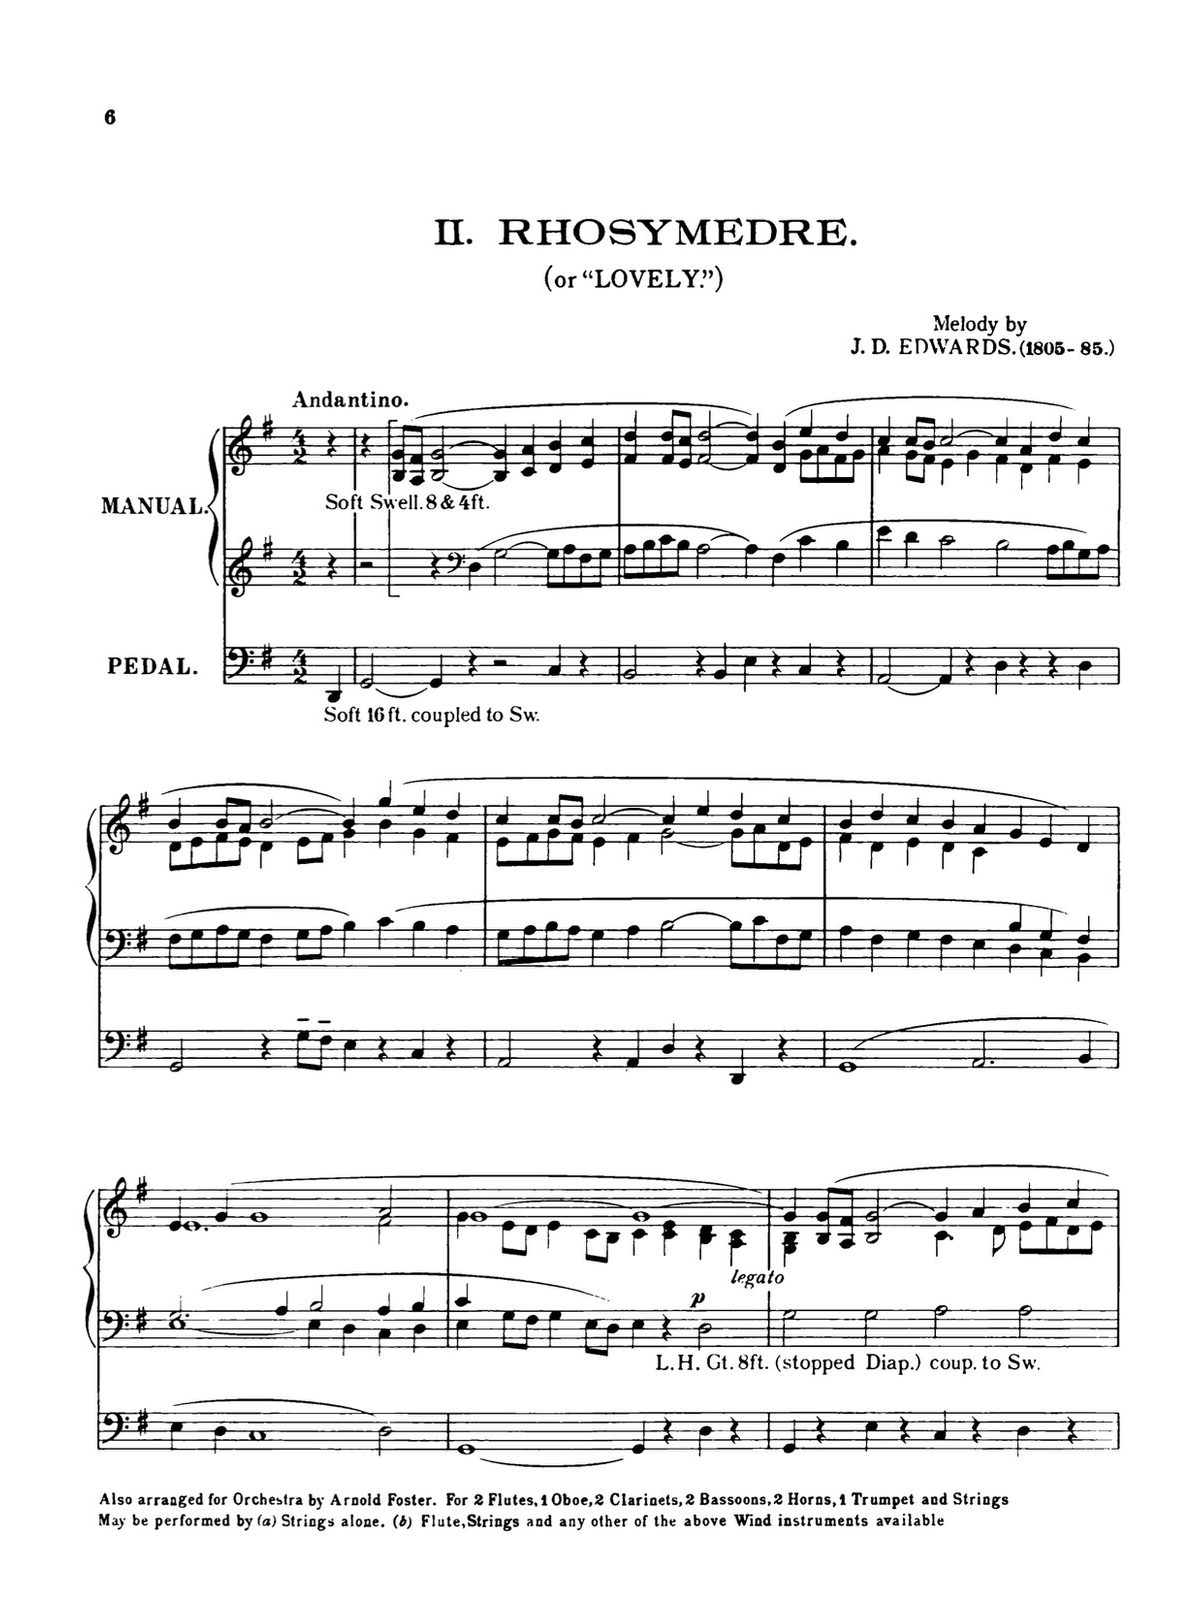 Vaughan Williams, 3 Preludes Founded on Welsh Hymn Tunes (for organ)-p06